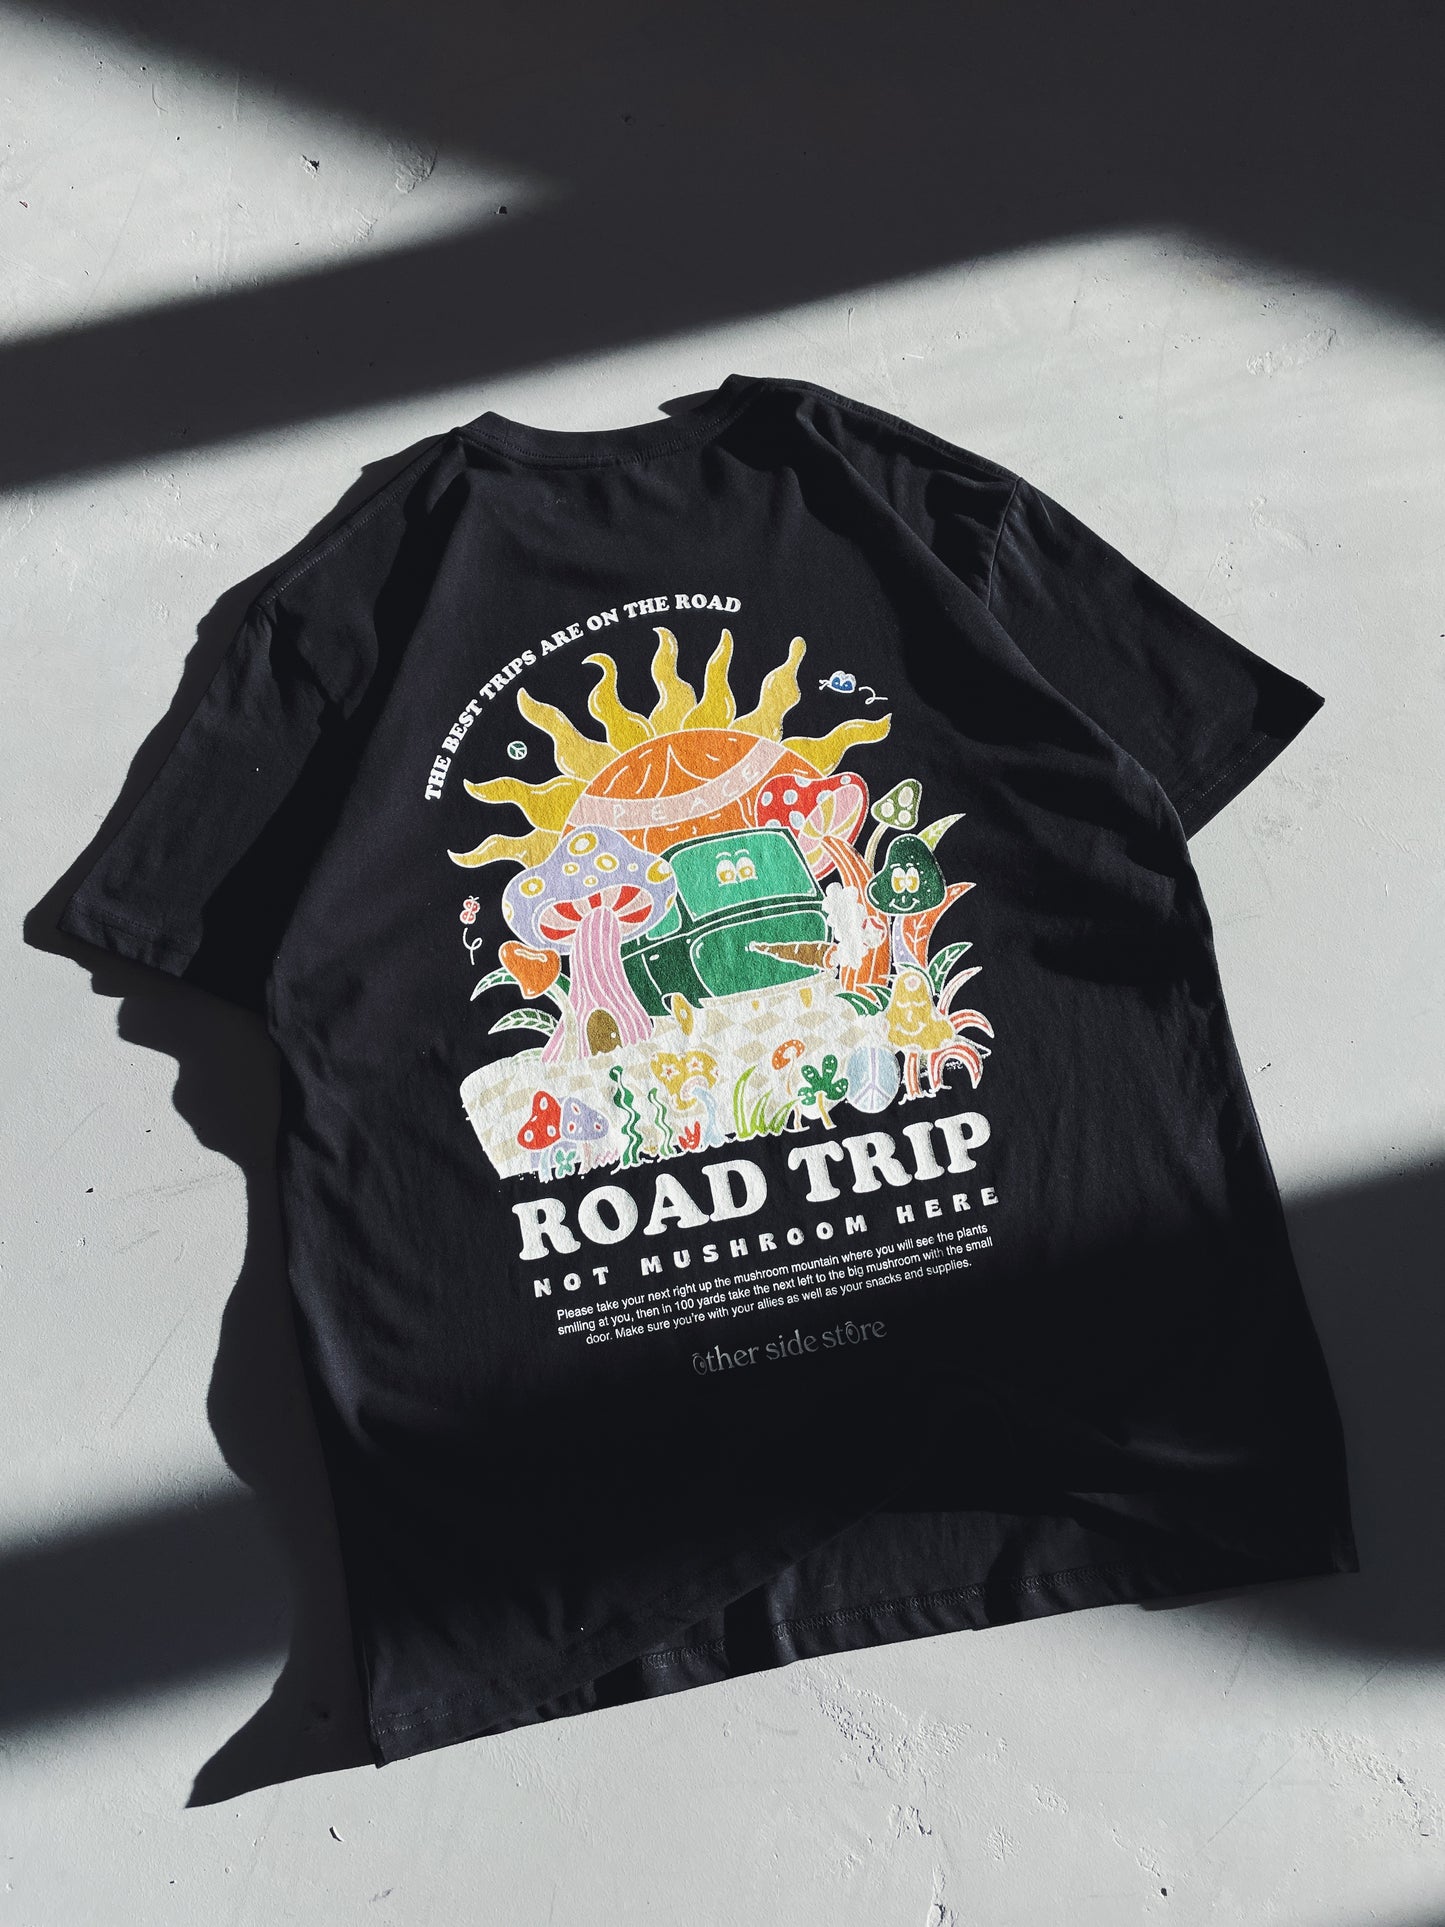 Other Side Store 'Road Trip' Tee - Black